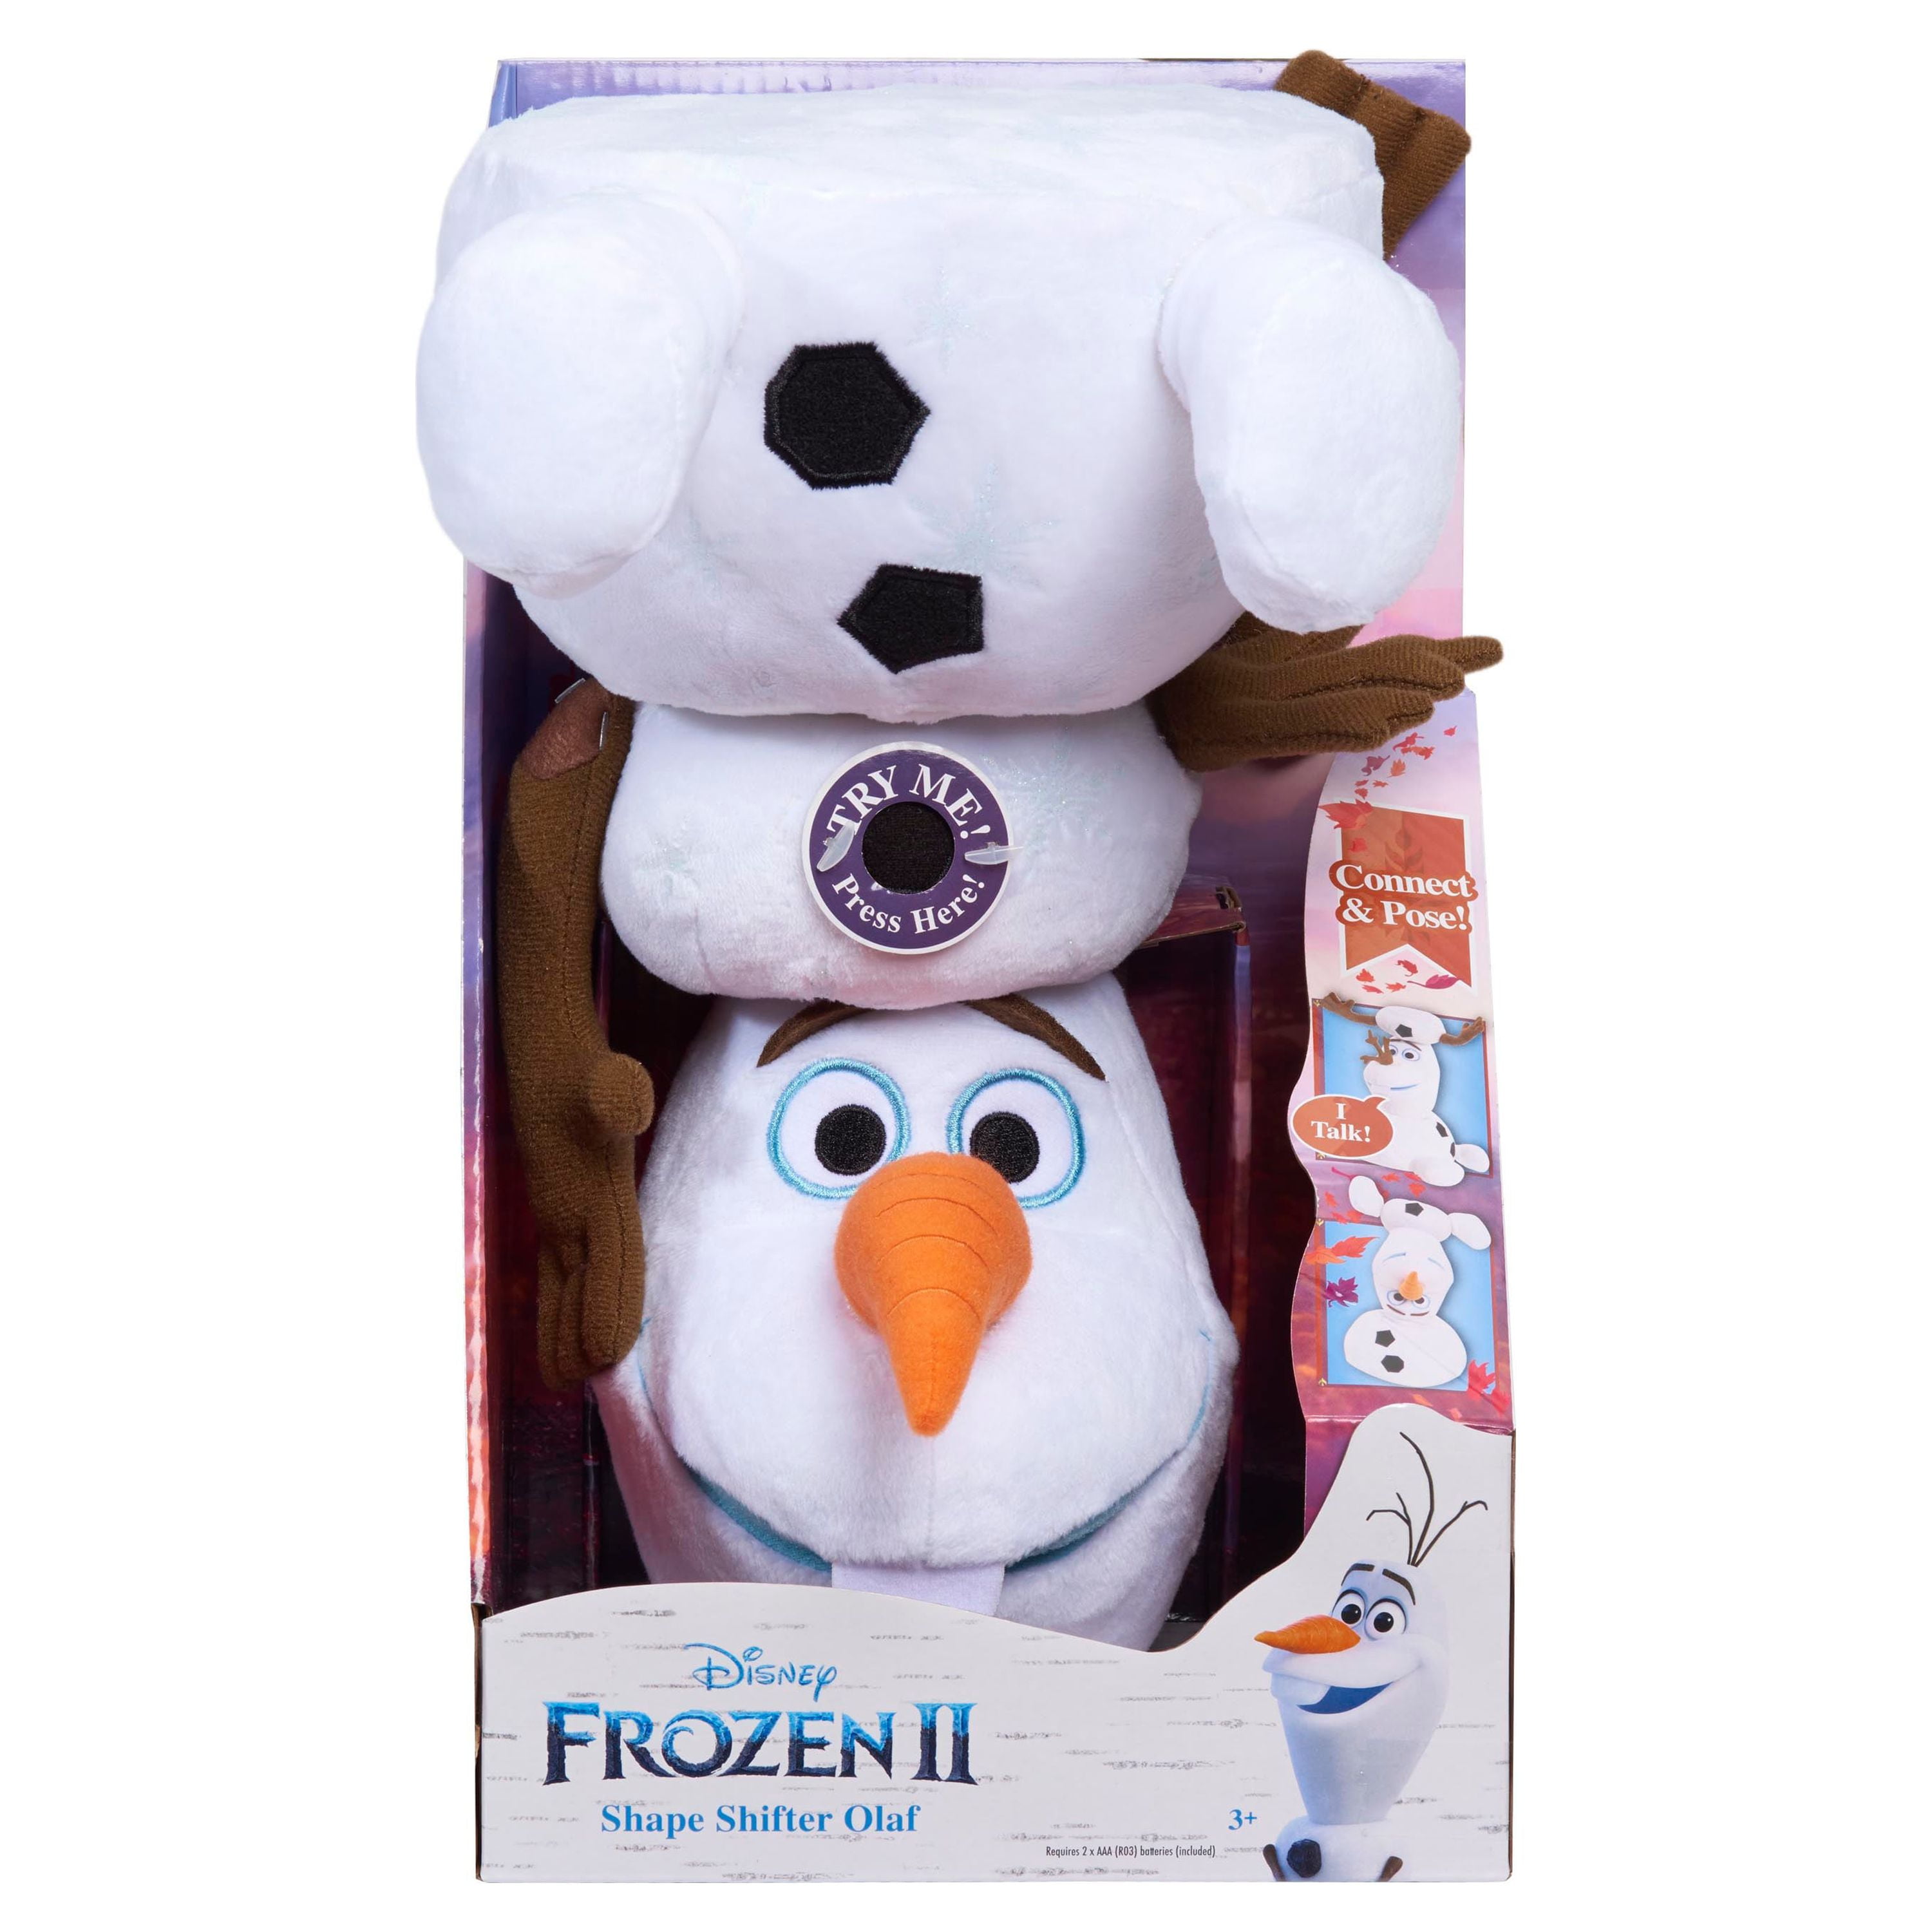 Shape for Disney\'s and Frozen Up, Presents Gifts Olaf Officially 2 Toys Shifter Licensed Kids Ages Plush, 3